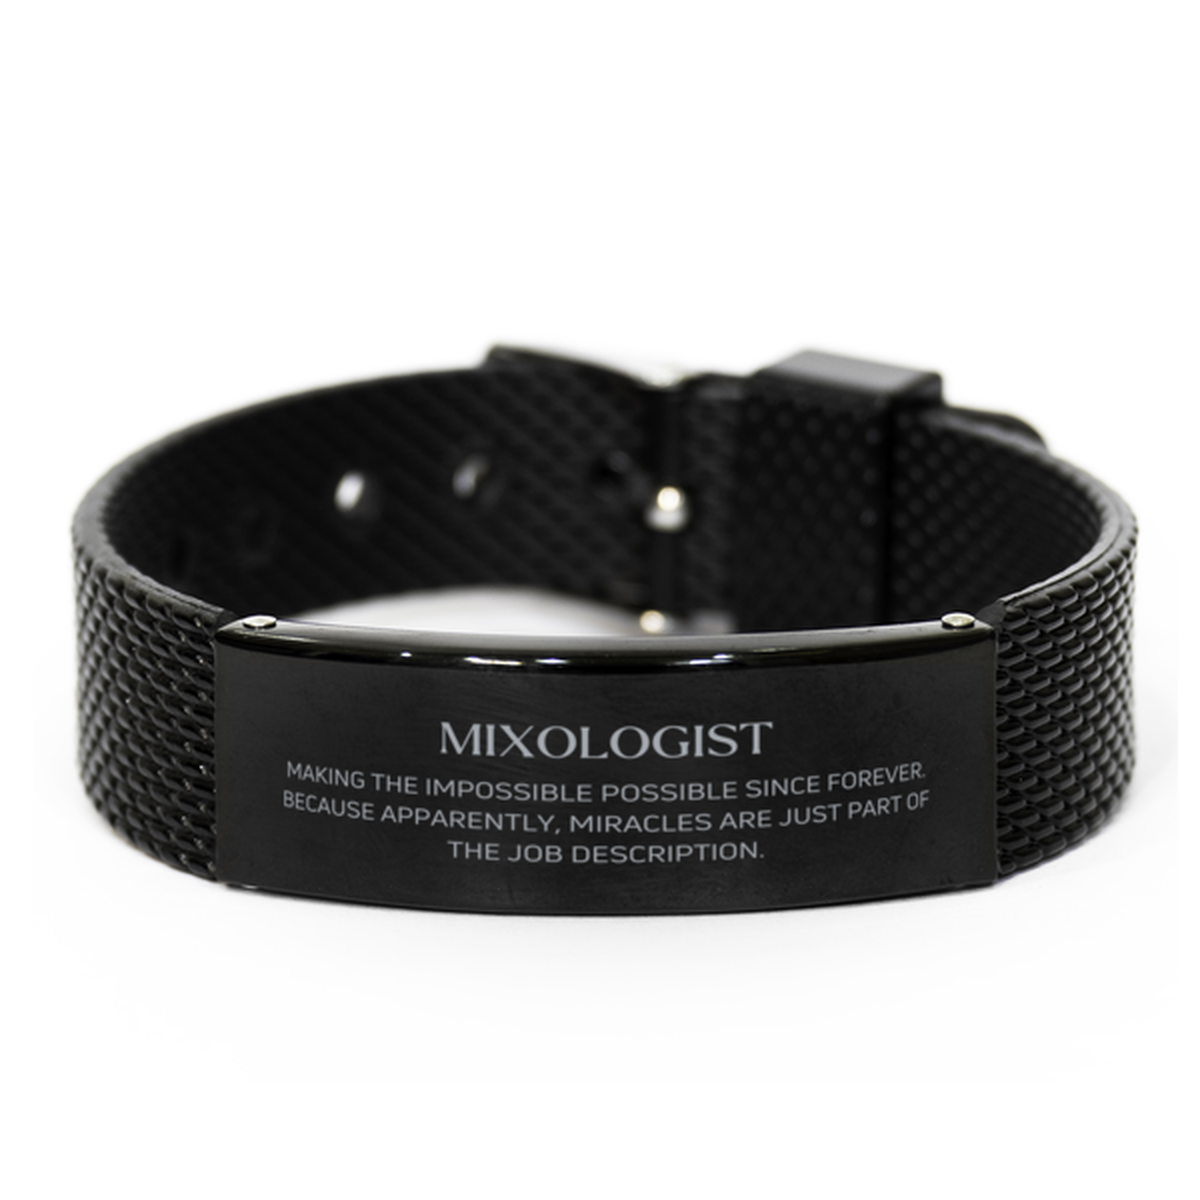 Funny Mixologist Gifts, Miracles are just part of the job description, Inspirational Birthday Black Shark Mesh Bracelet For Mixologist, Men, Women, Coworkers, Friends, Boss